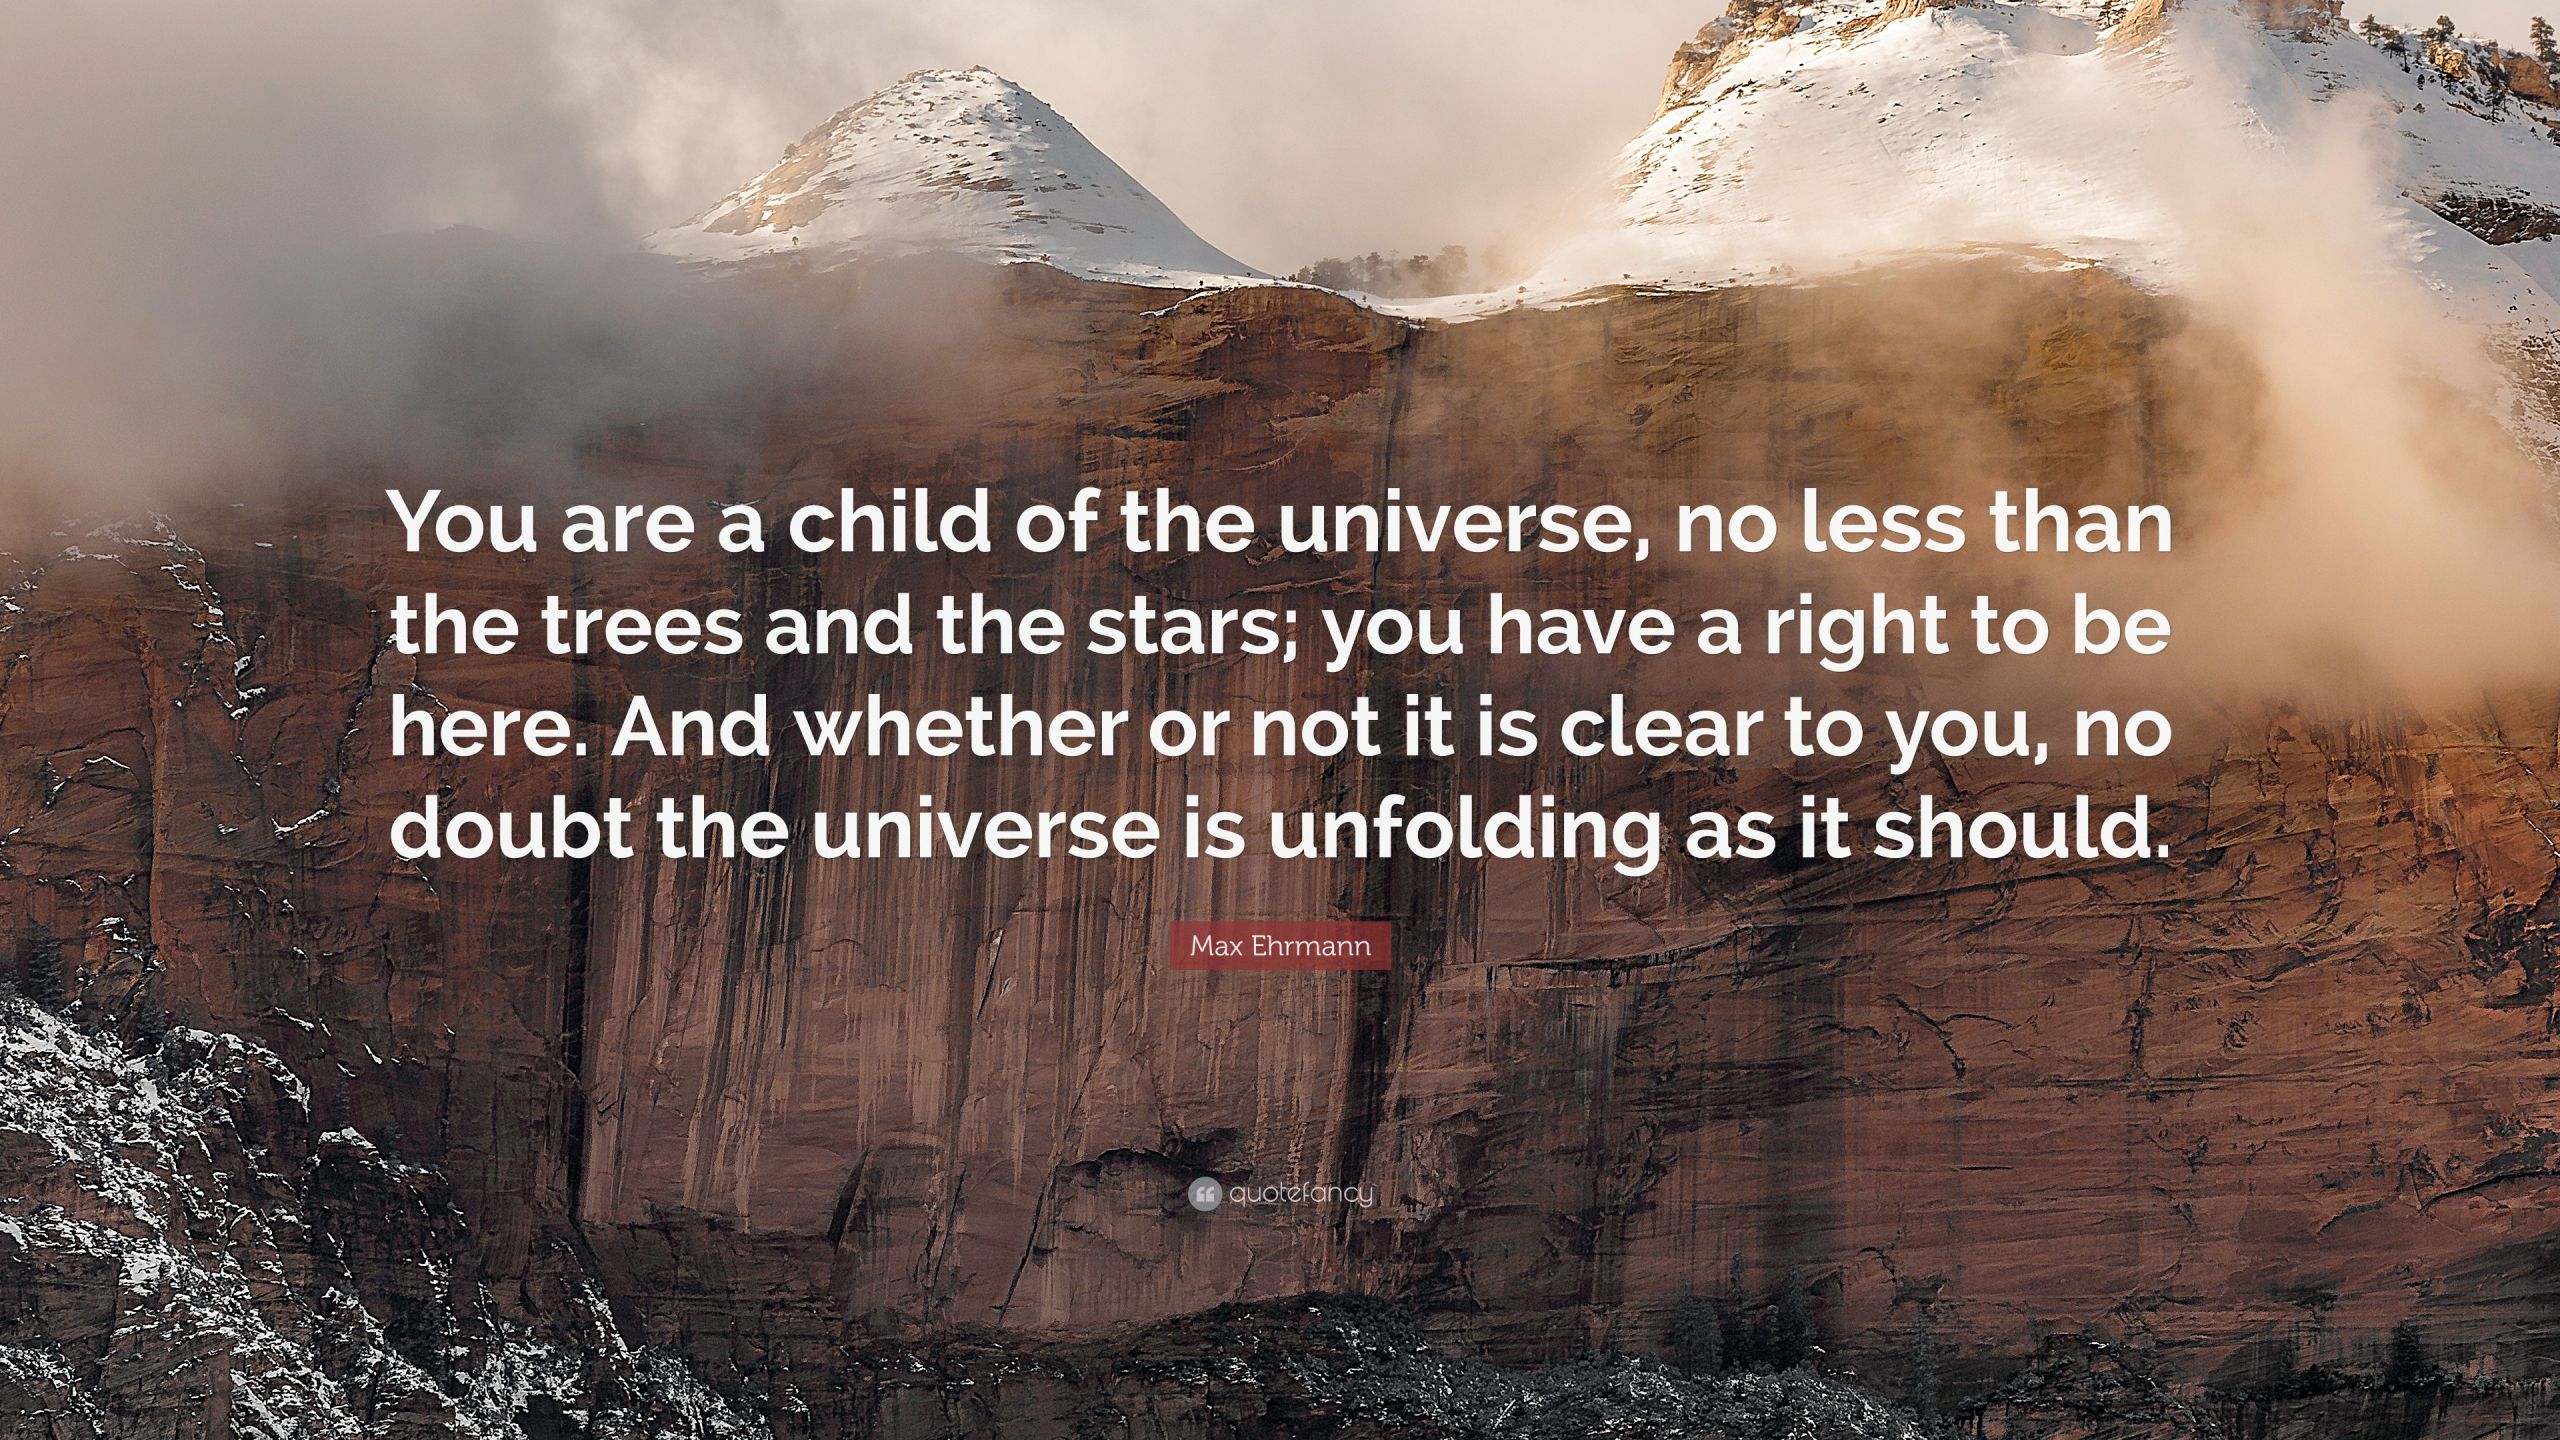 You Are A Child Of The Universe Quote
 Max Ehrmann Quote “You are a child of the universe no